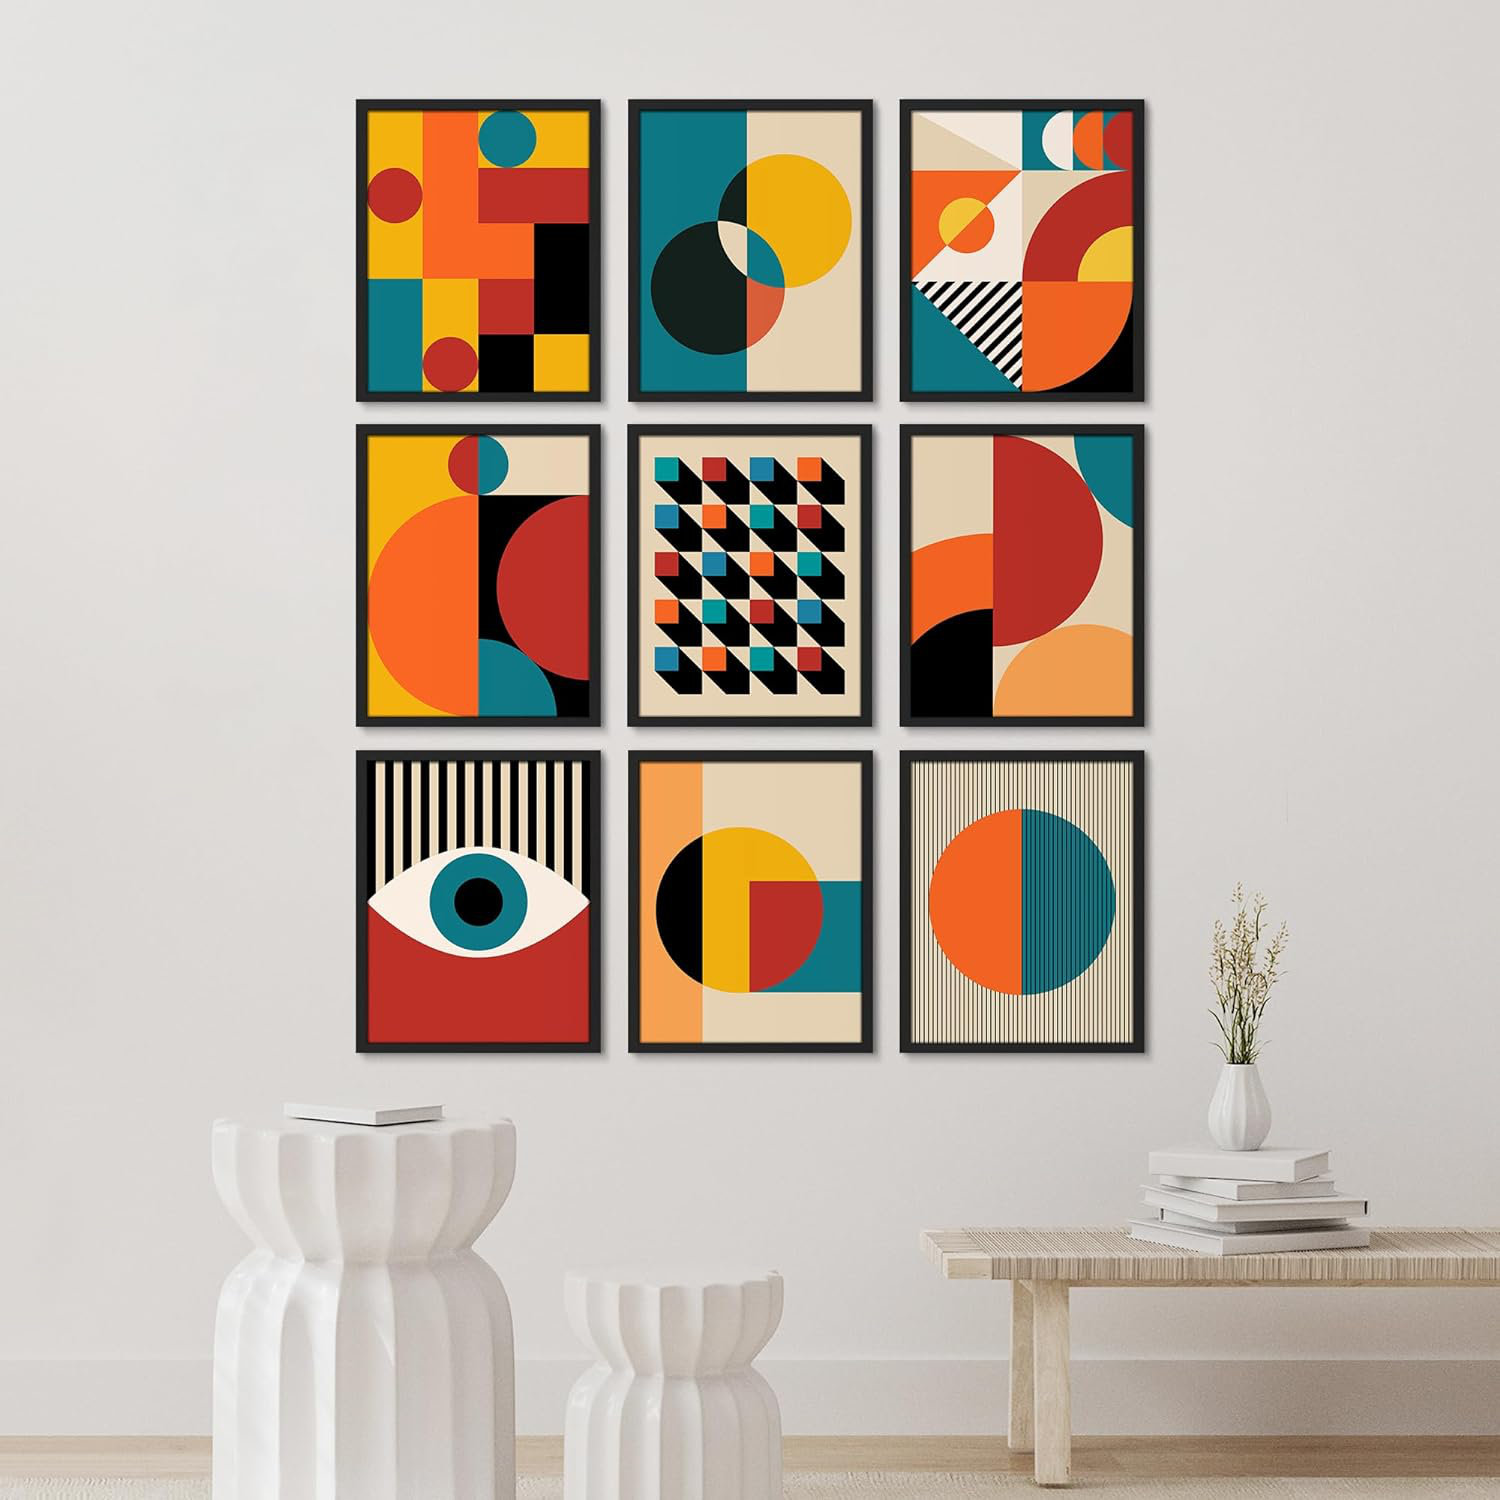 Colorful Geometric Abstract Shapes Poster Mid Century Modern Wall Art  Minimalist Decor Framed On Paper 9 Pieces Print